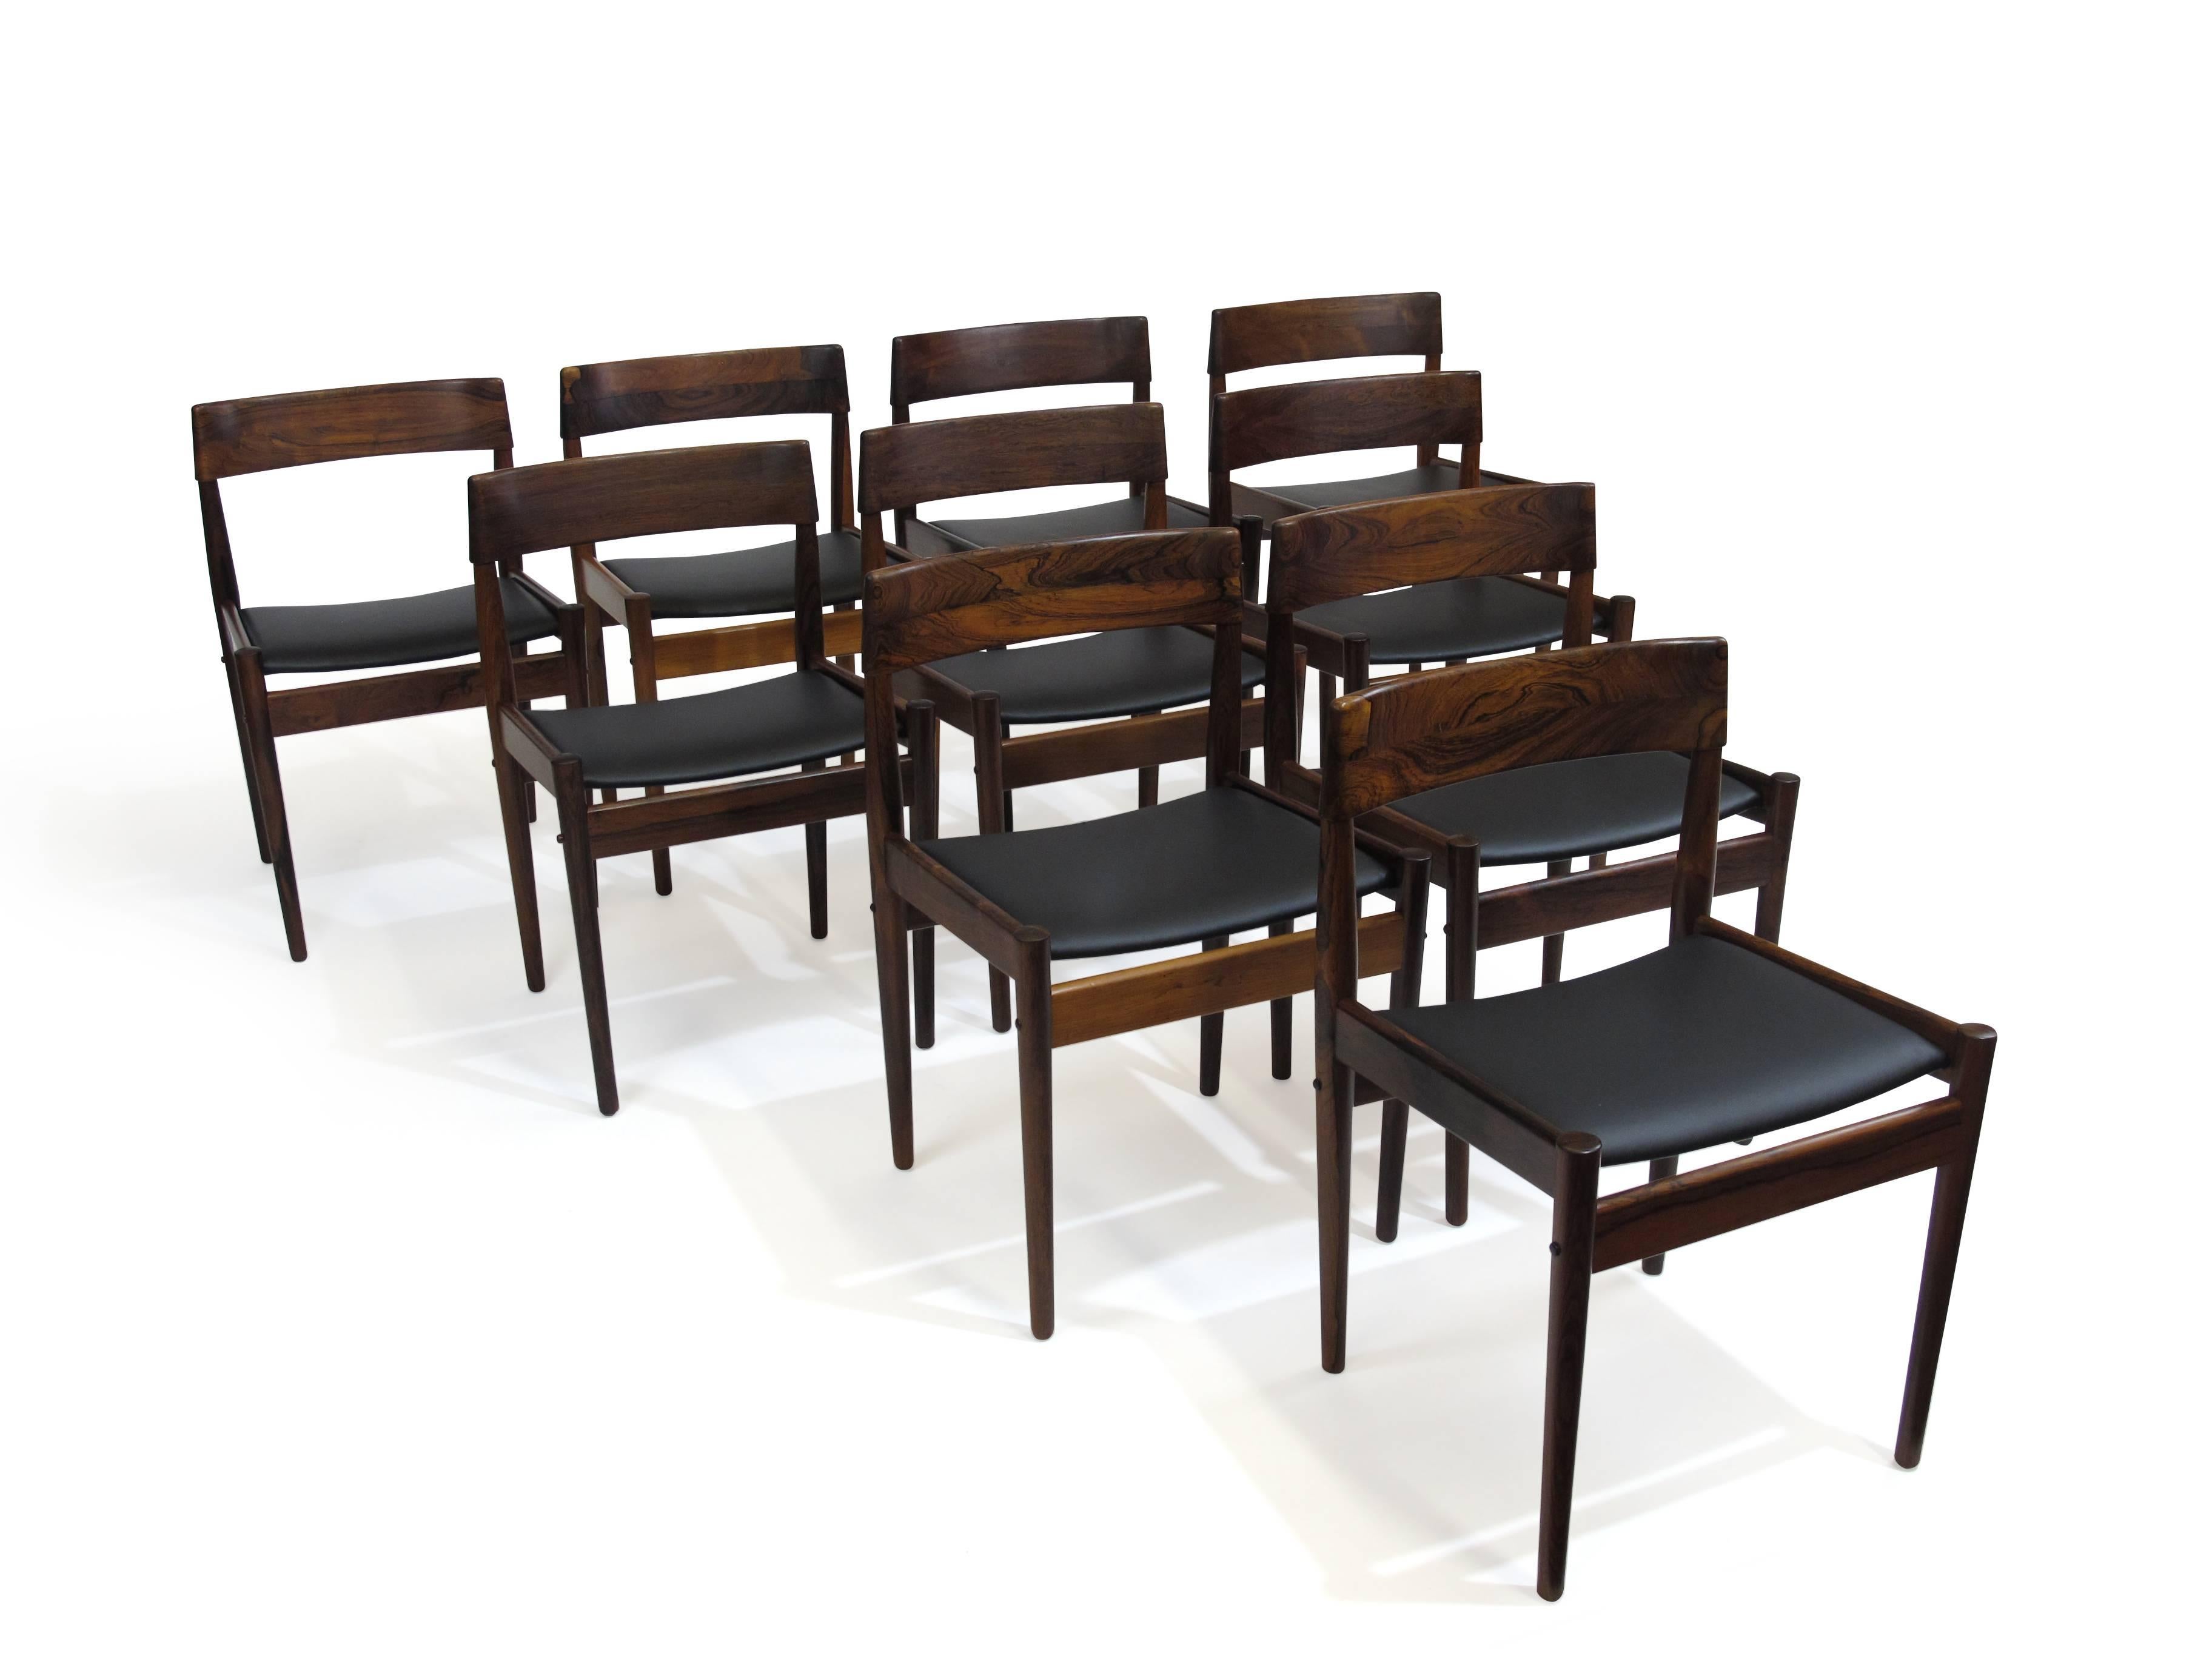 Exquisite set of ten solid Brazilian rosewood dining chairs designed by Grete Jalk for P. Jeppesens in 1961. Model P J 3-2 features hand sculptured back rests of solid Brazilian rosewood which is dark has has rich dynamic grain patterns. Newly